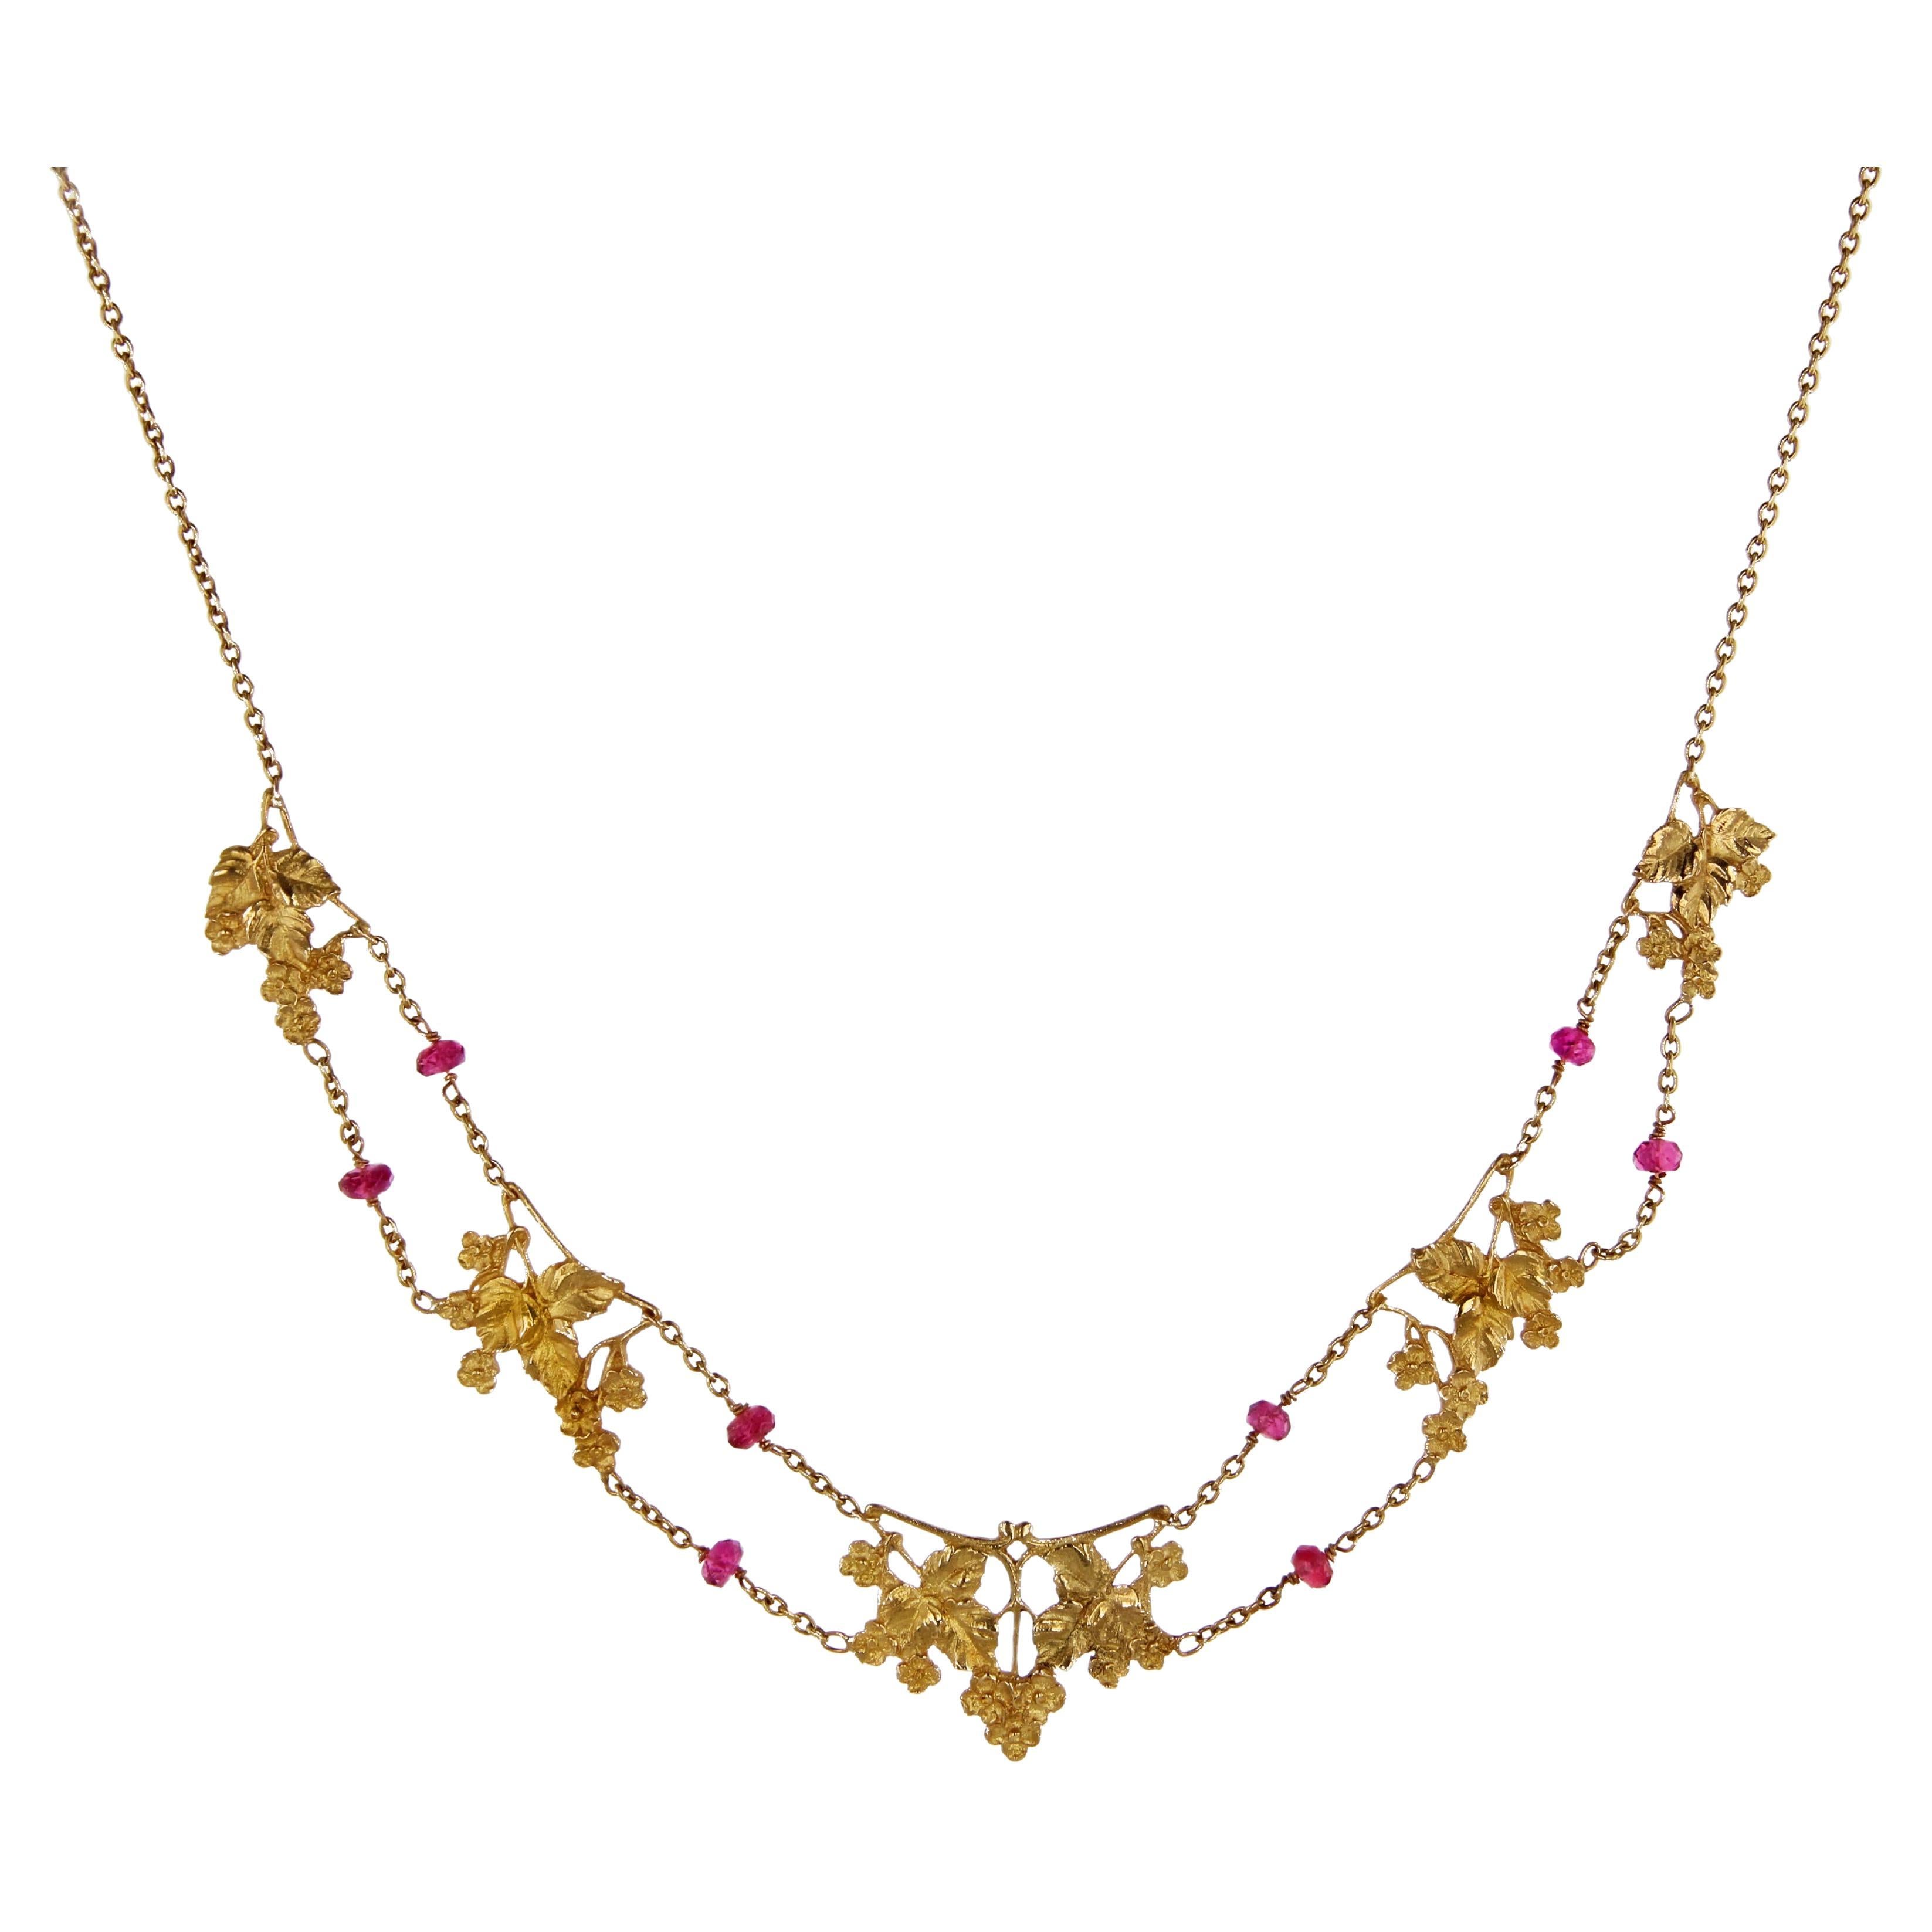 French 1950s 18 Carat Yellow Gold Pink Spinel Beads Drapery Necklace